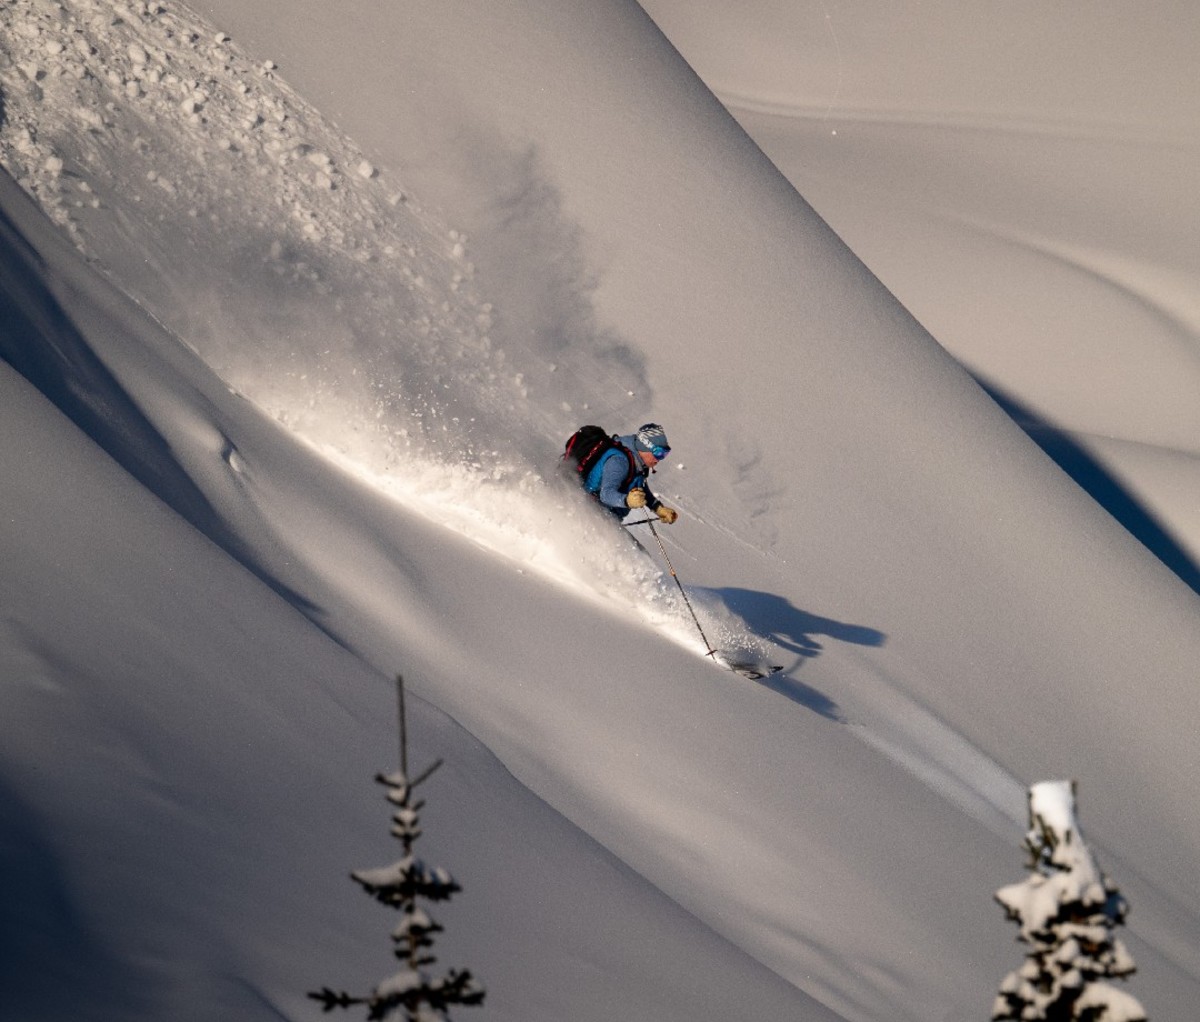 Backcountry skier in BC skiing down a steep, powdery slope.